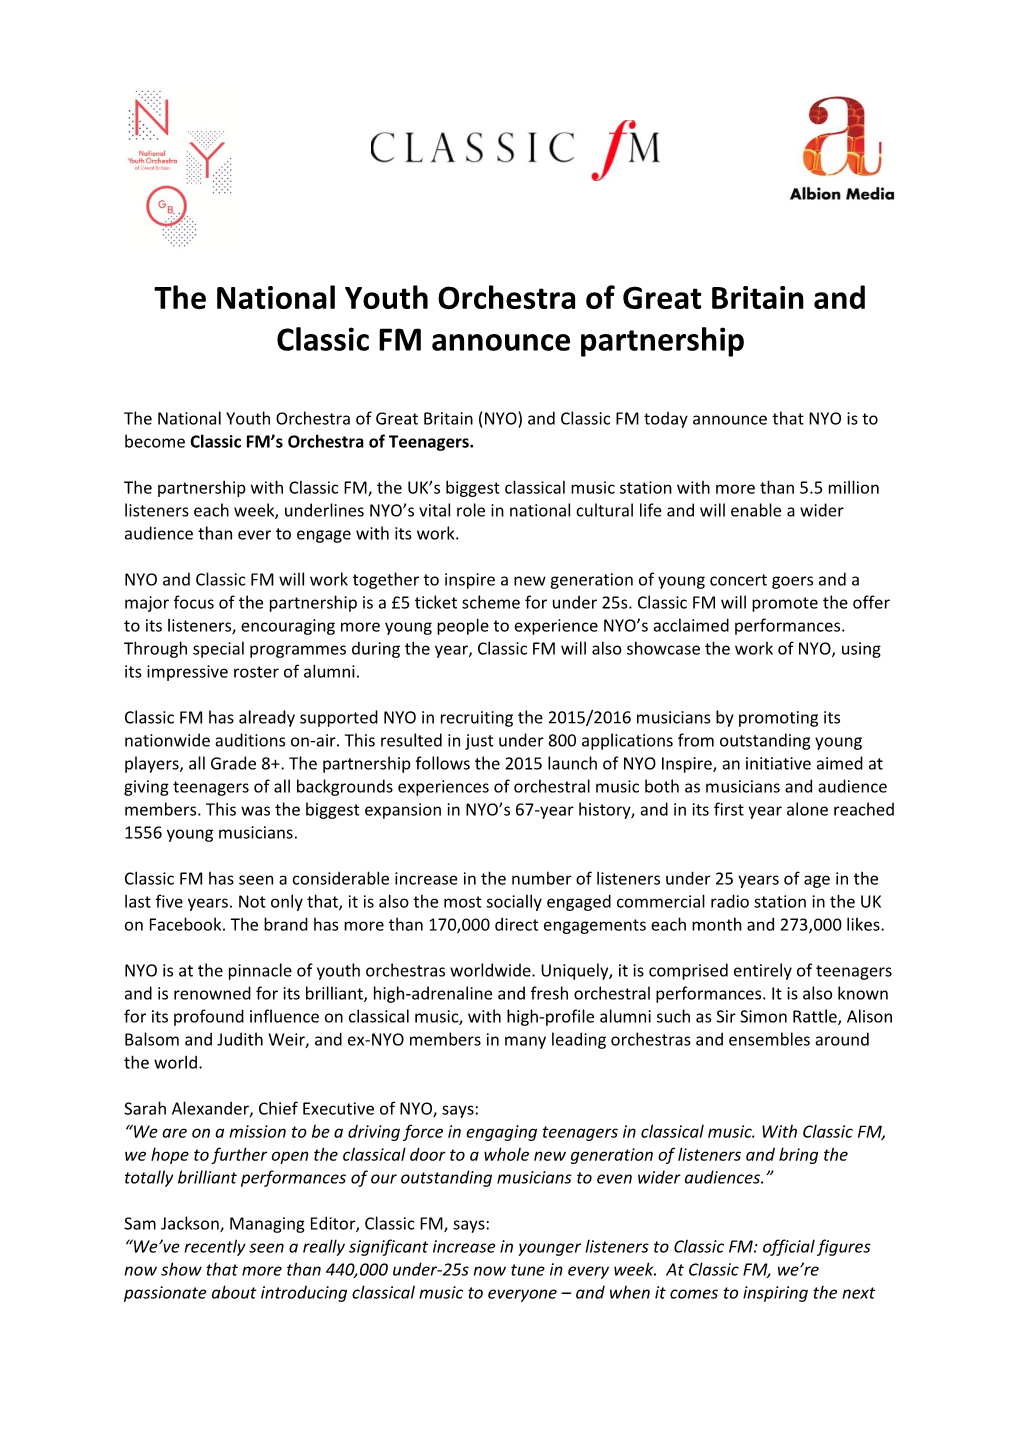 The National Youth Orchestra of Great Britain and Classic FM Announce Partnership